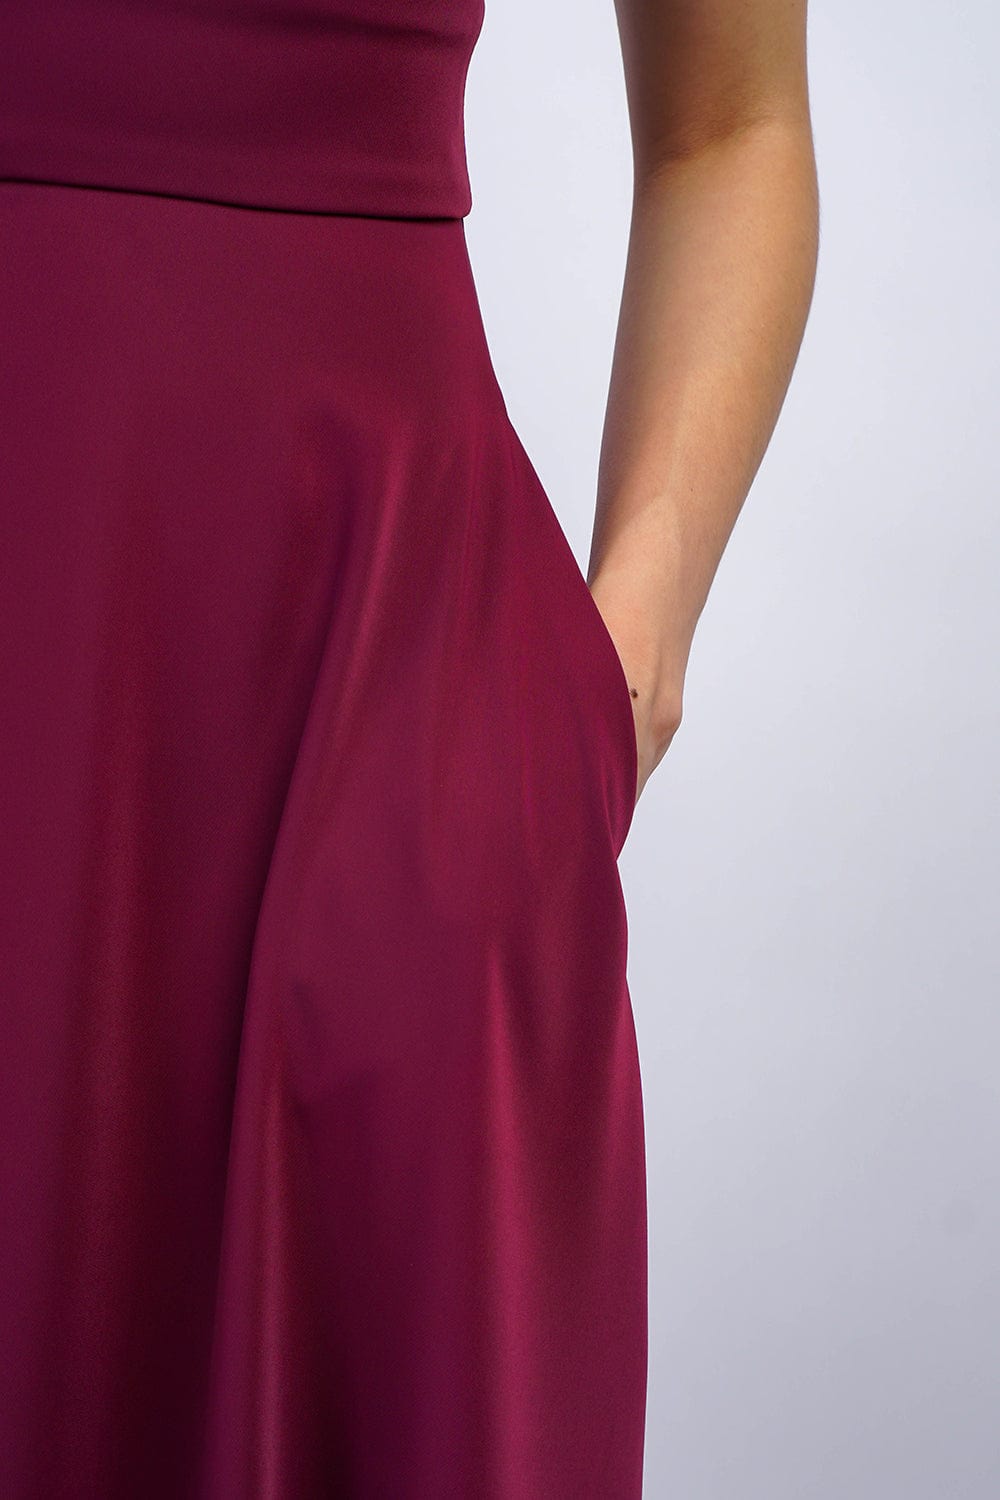 GOWNS Maroon V Neck Front Slit Soraya Gown - Chloe Dao